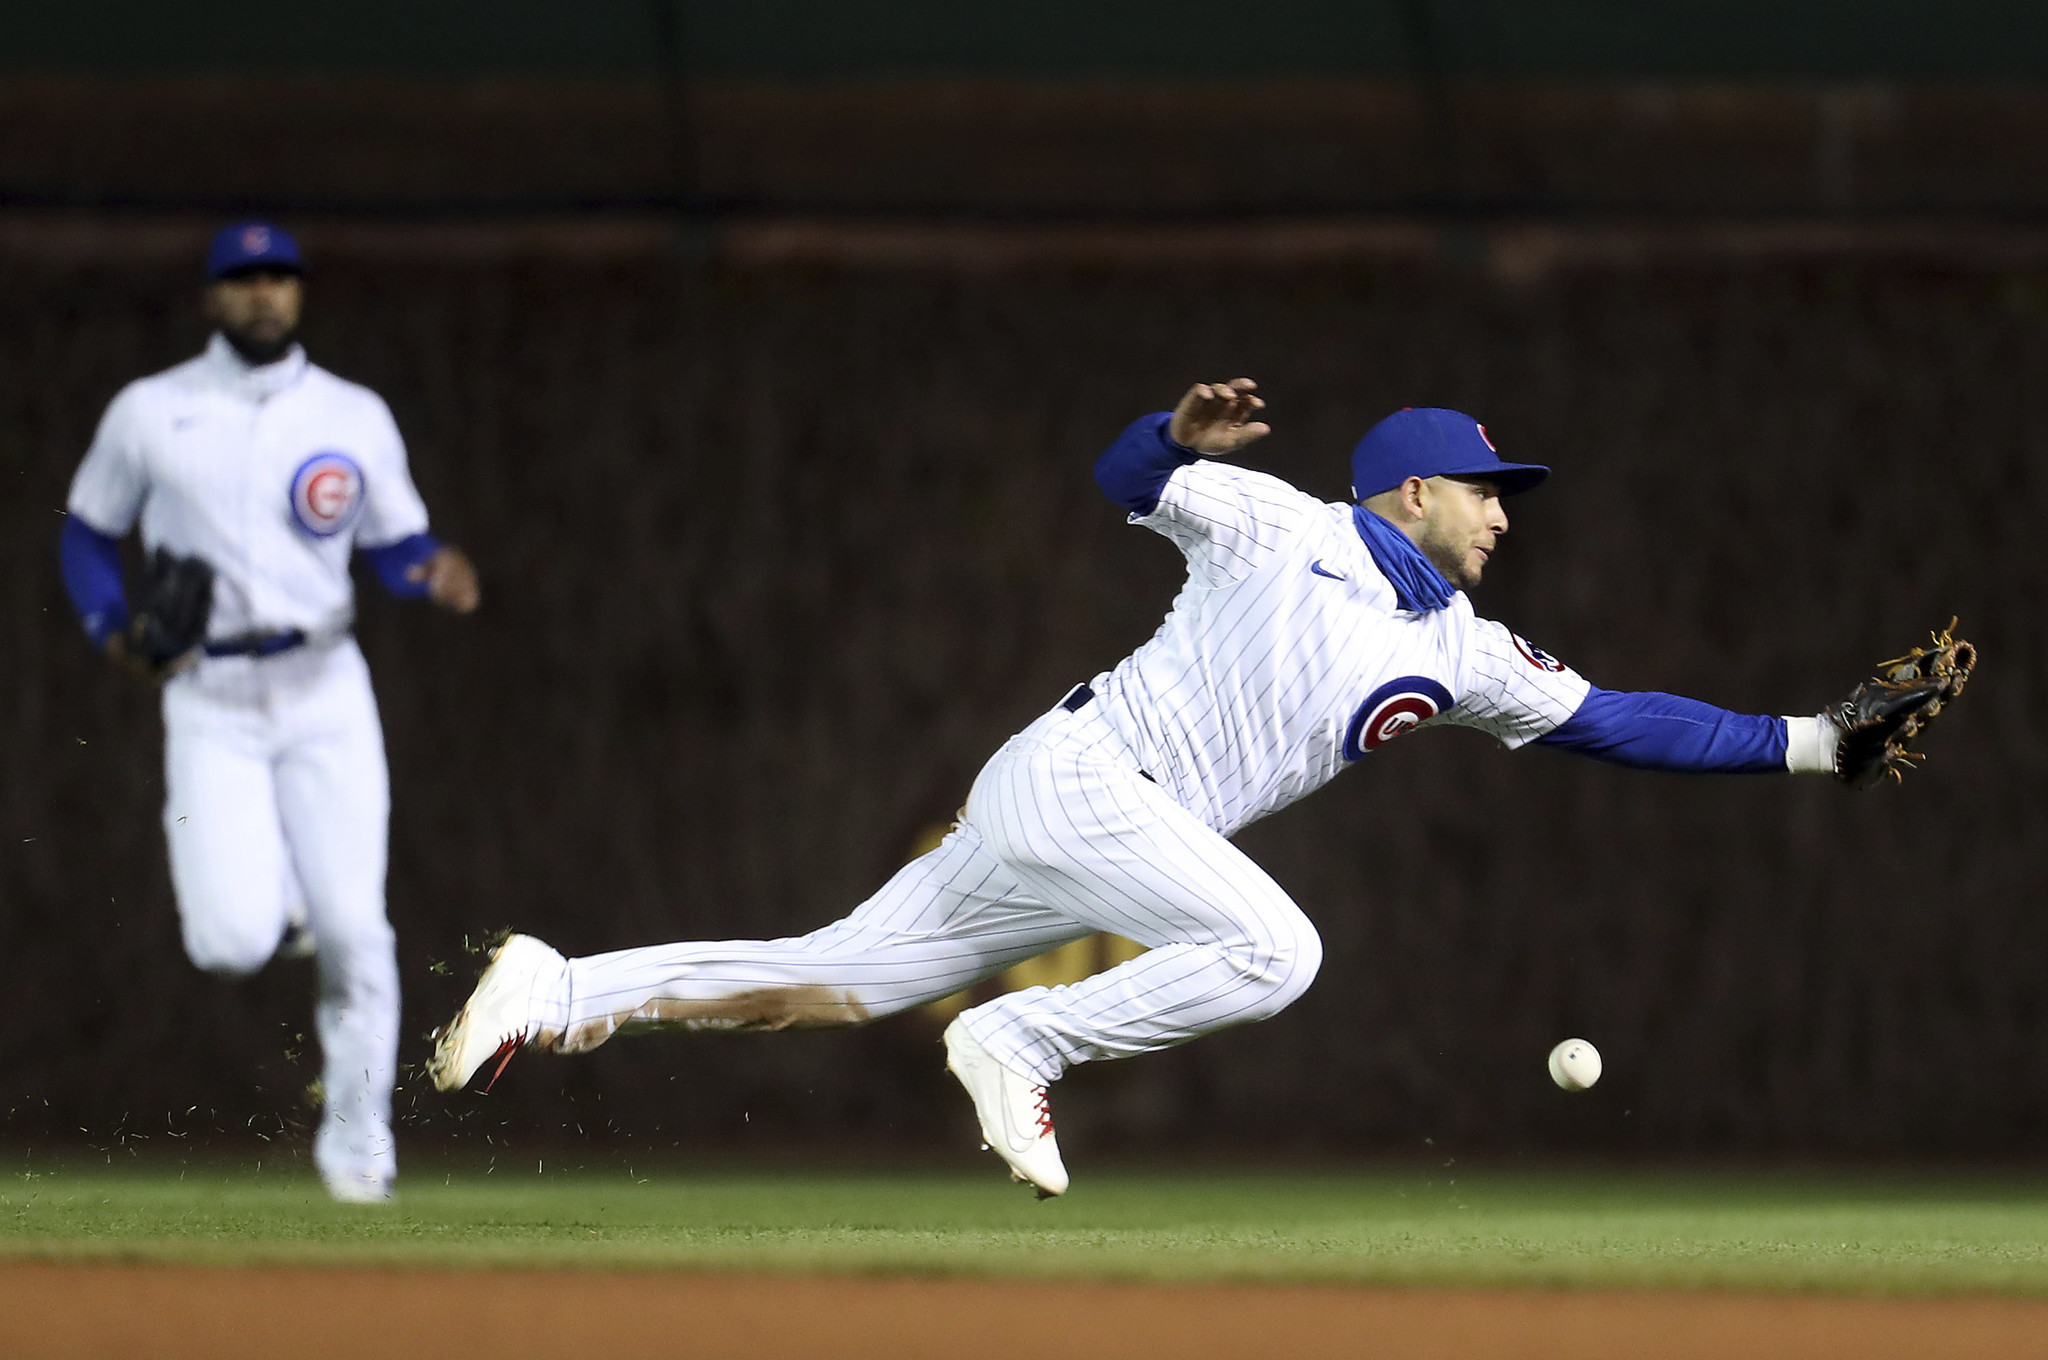 Will the Cubs sweep the White Sox?